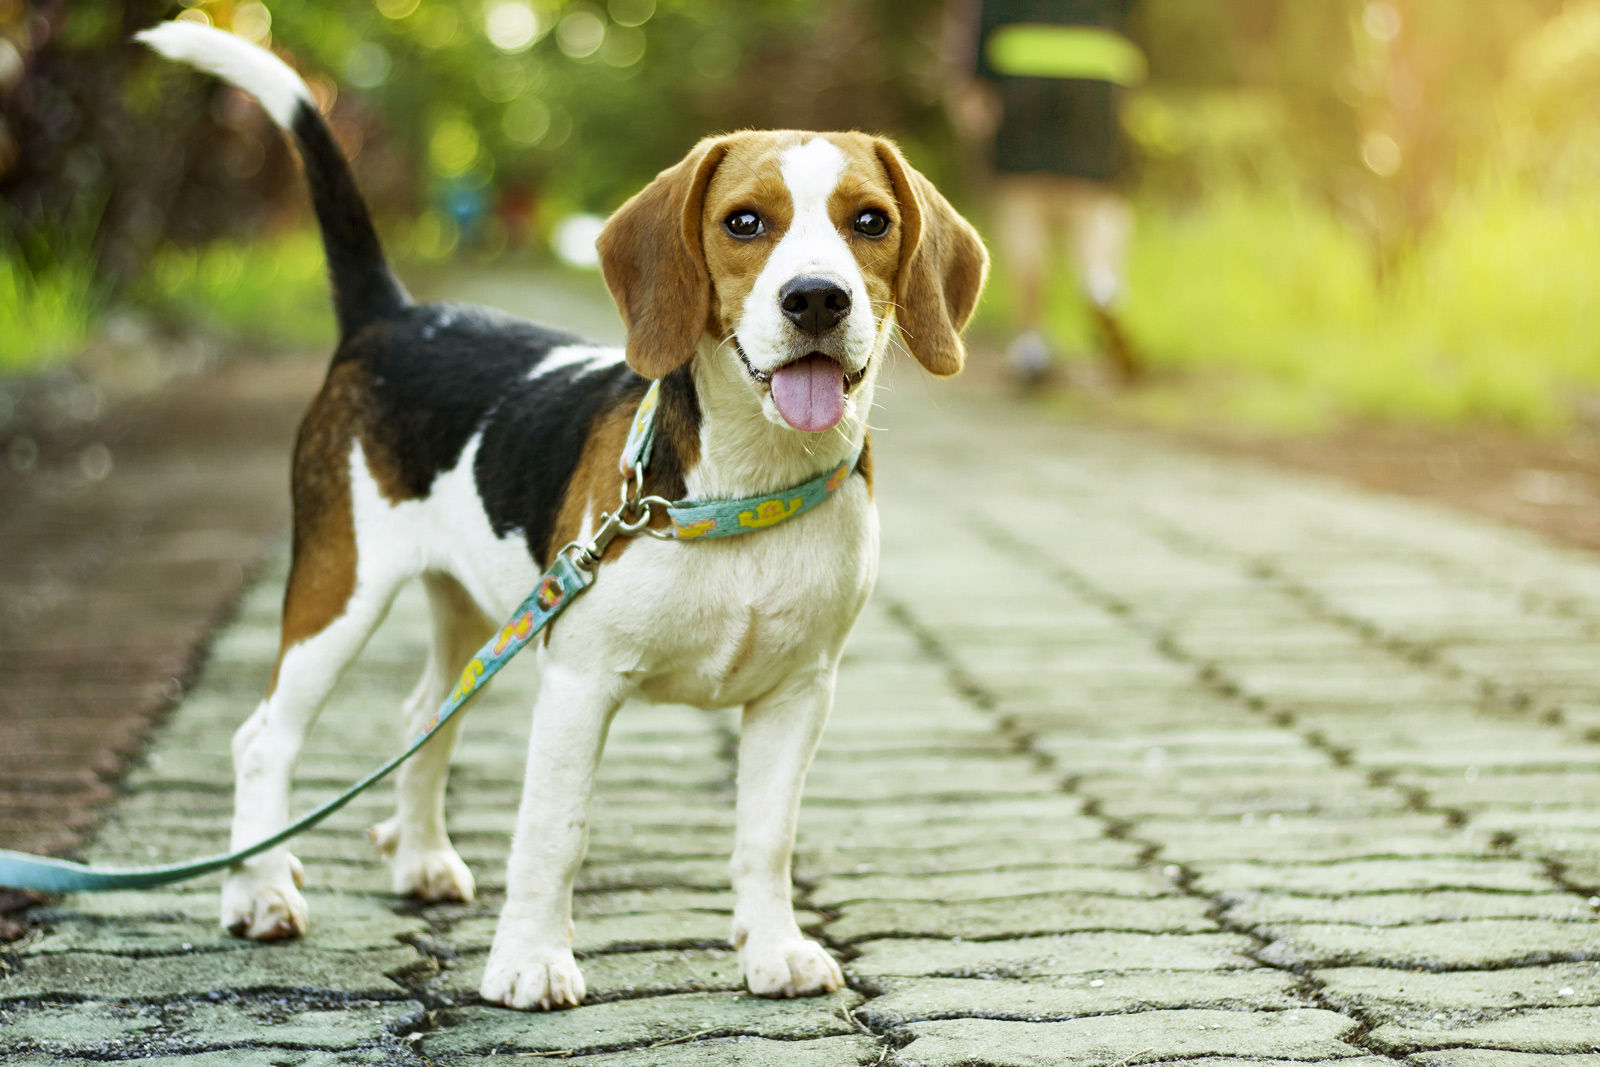 Take Fido for a walk using our hotel's guide.